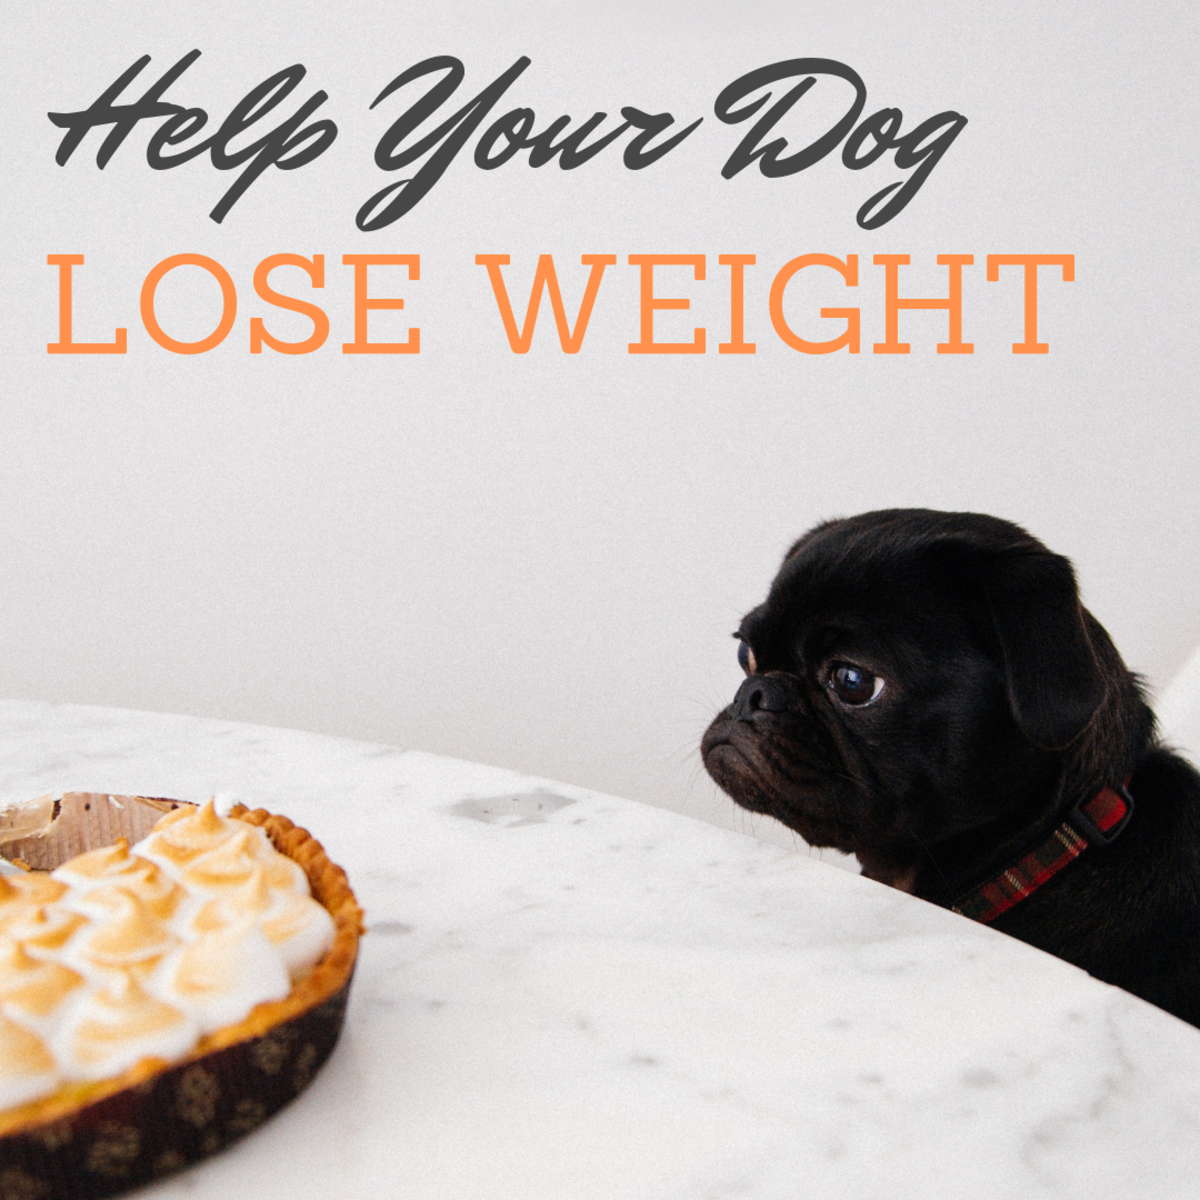 20 Fat-Burning Exercises That Will Bond You And Your Dog! - Dog Lab